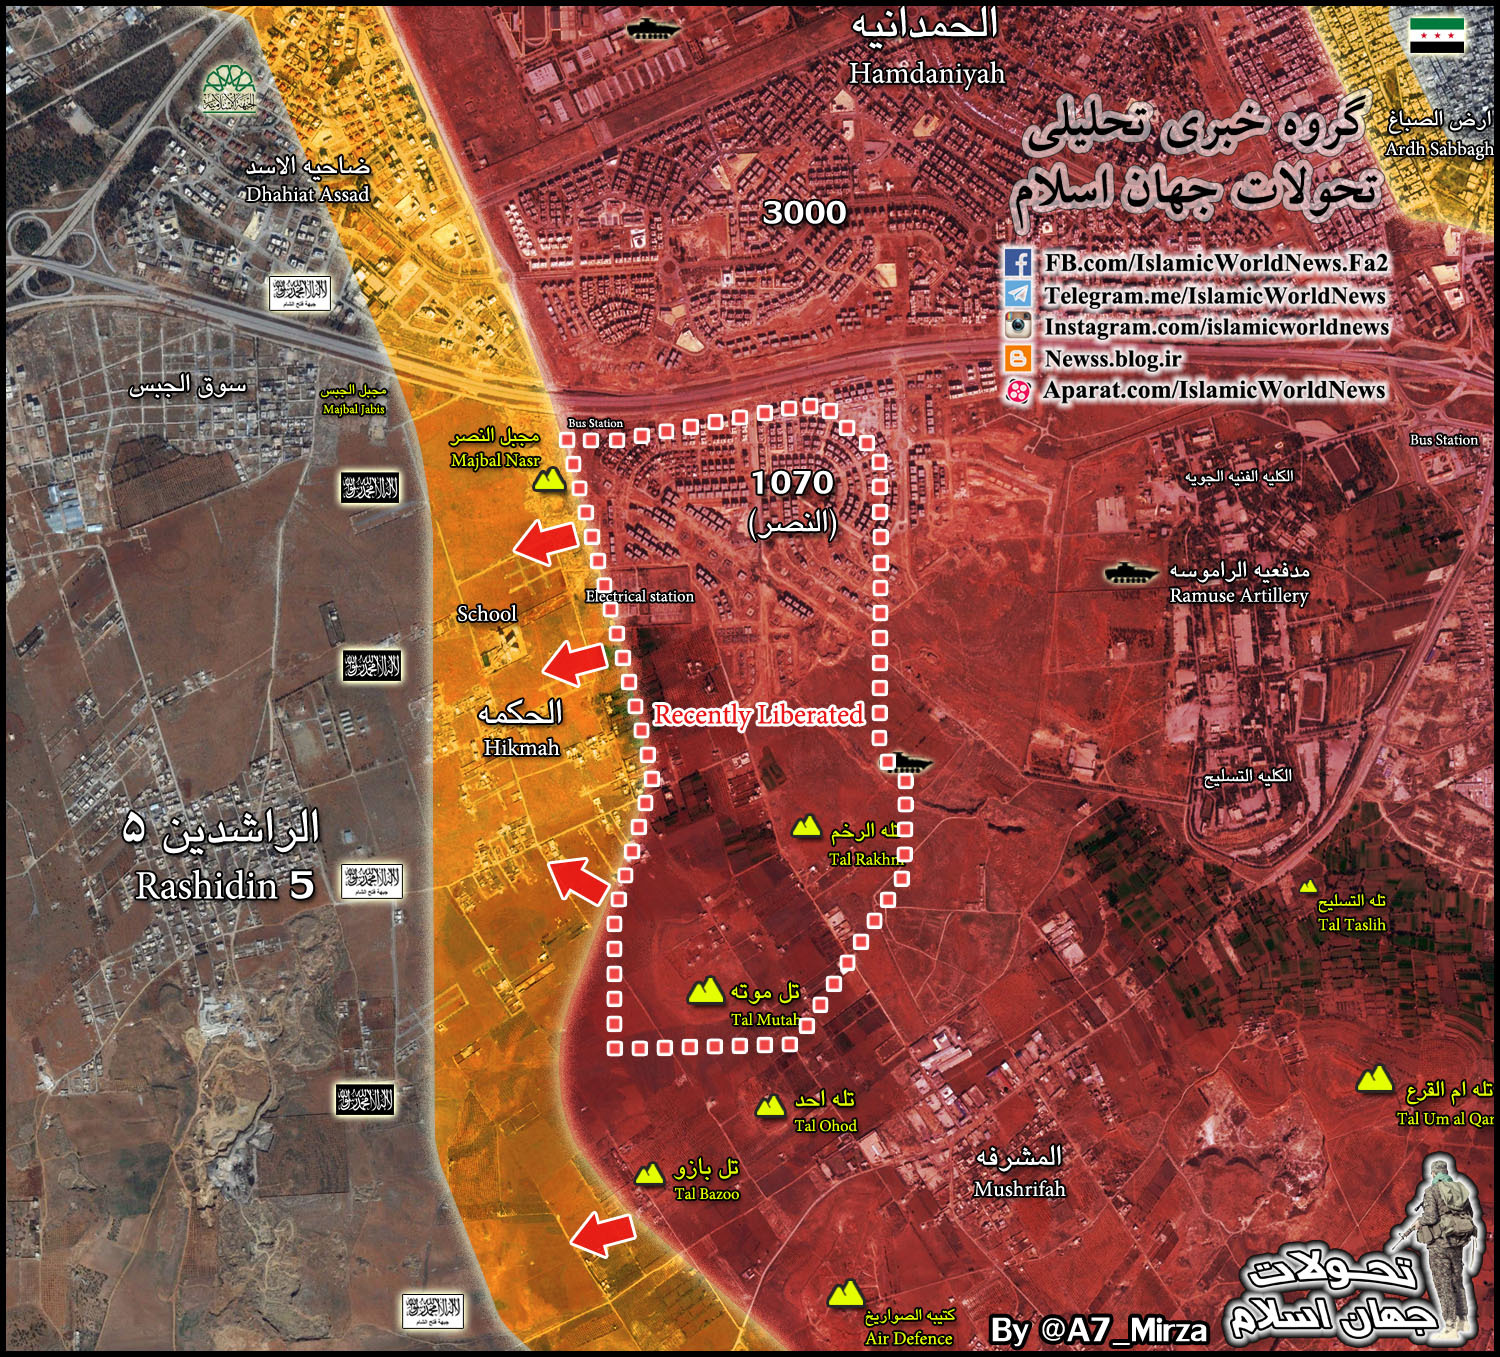 Overview of Military Situation in Aleppo City on November 8, 2016